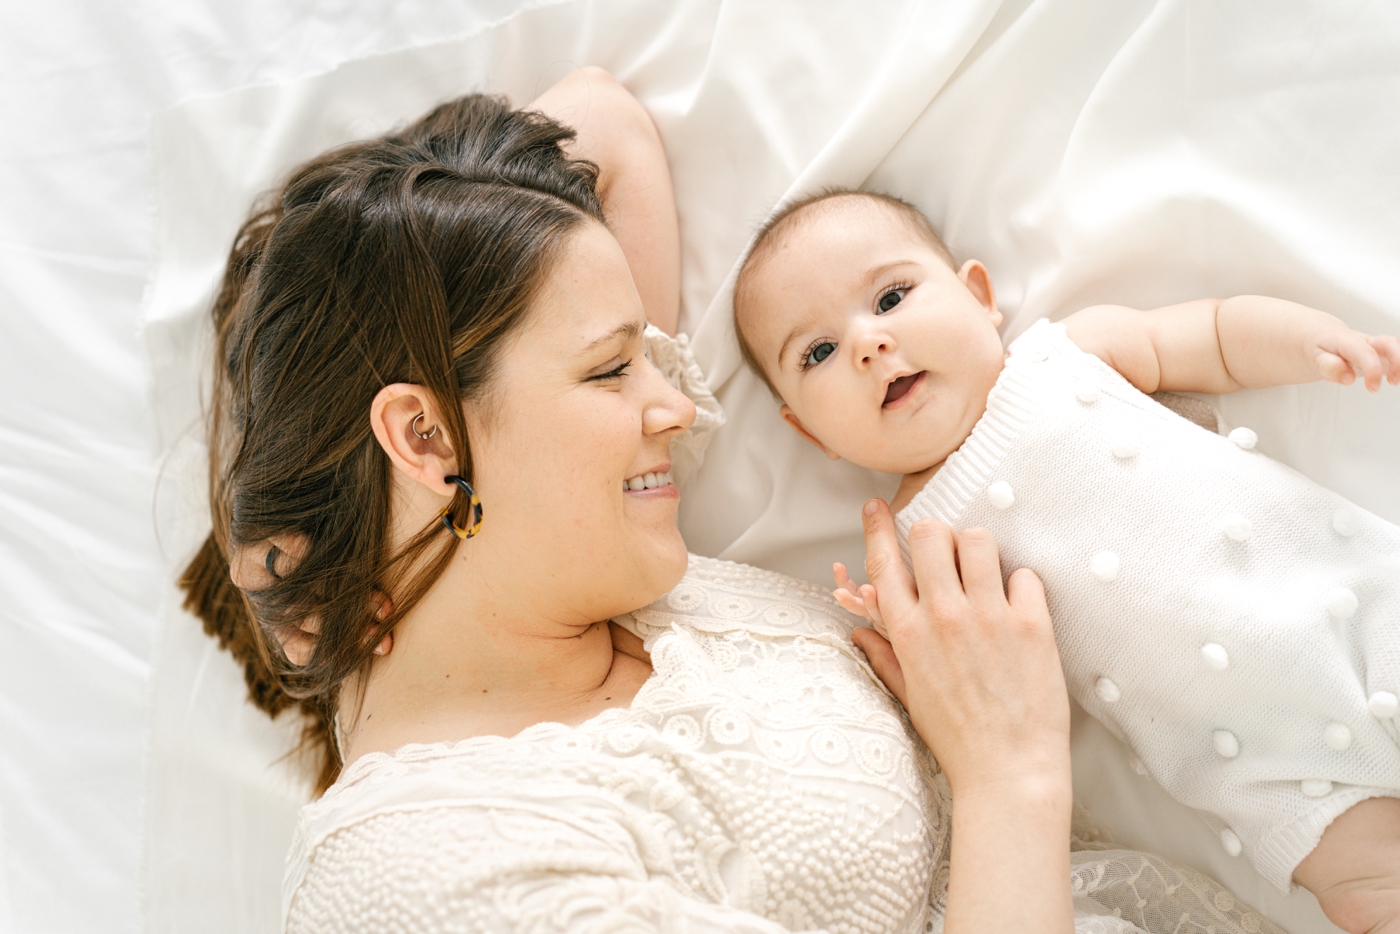 Mom laying on bed with baby girl during studio milestone session. Photo by Lauren Sosler Photography.